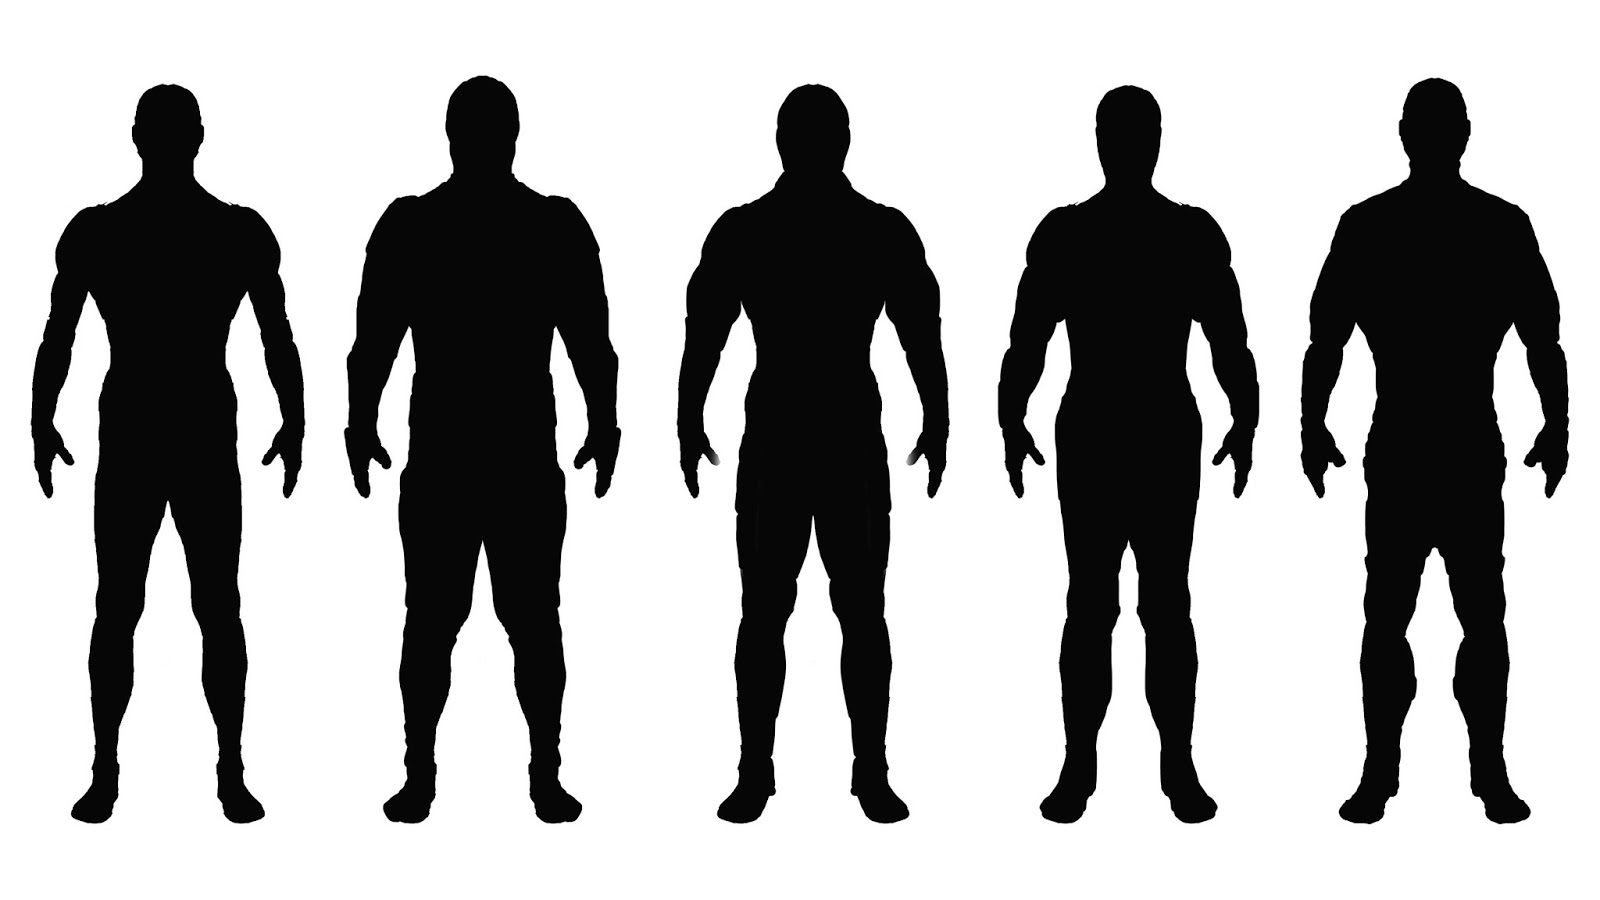 15 Human Body Silhouette   Free Cliparts That You Can Download To You